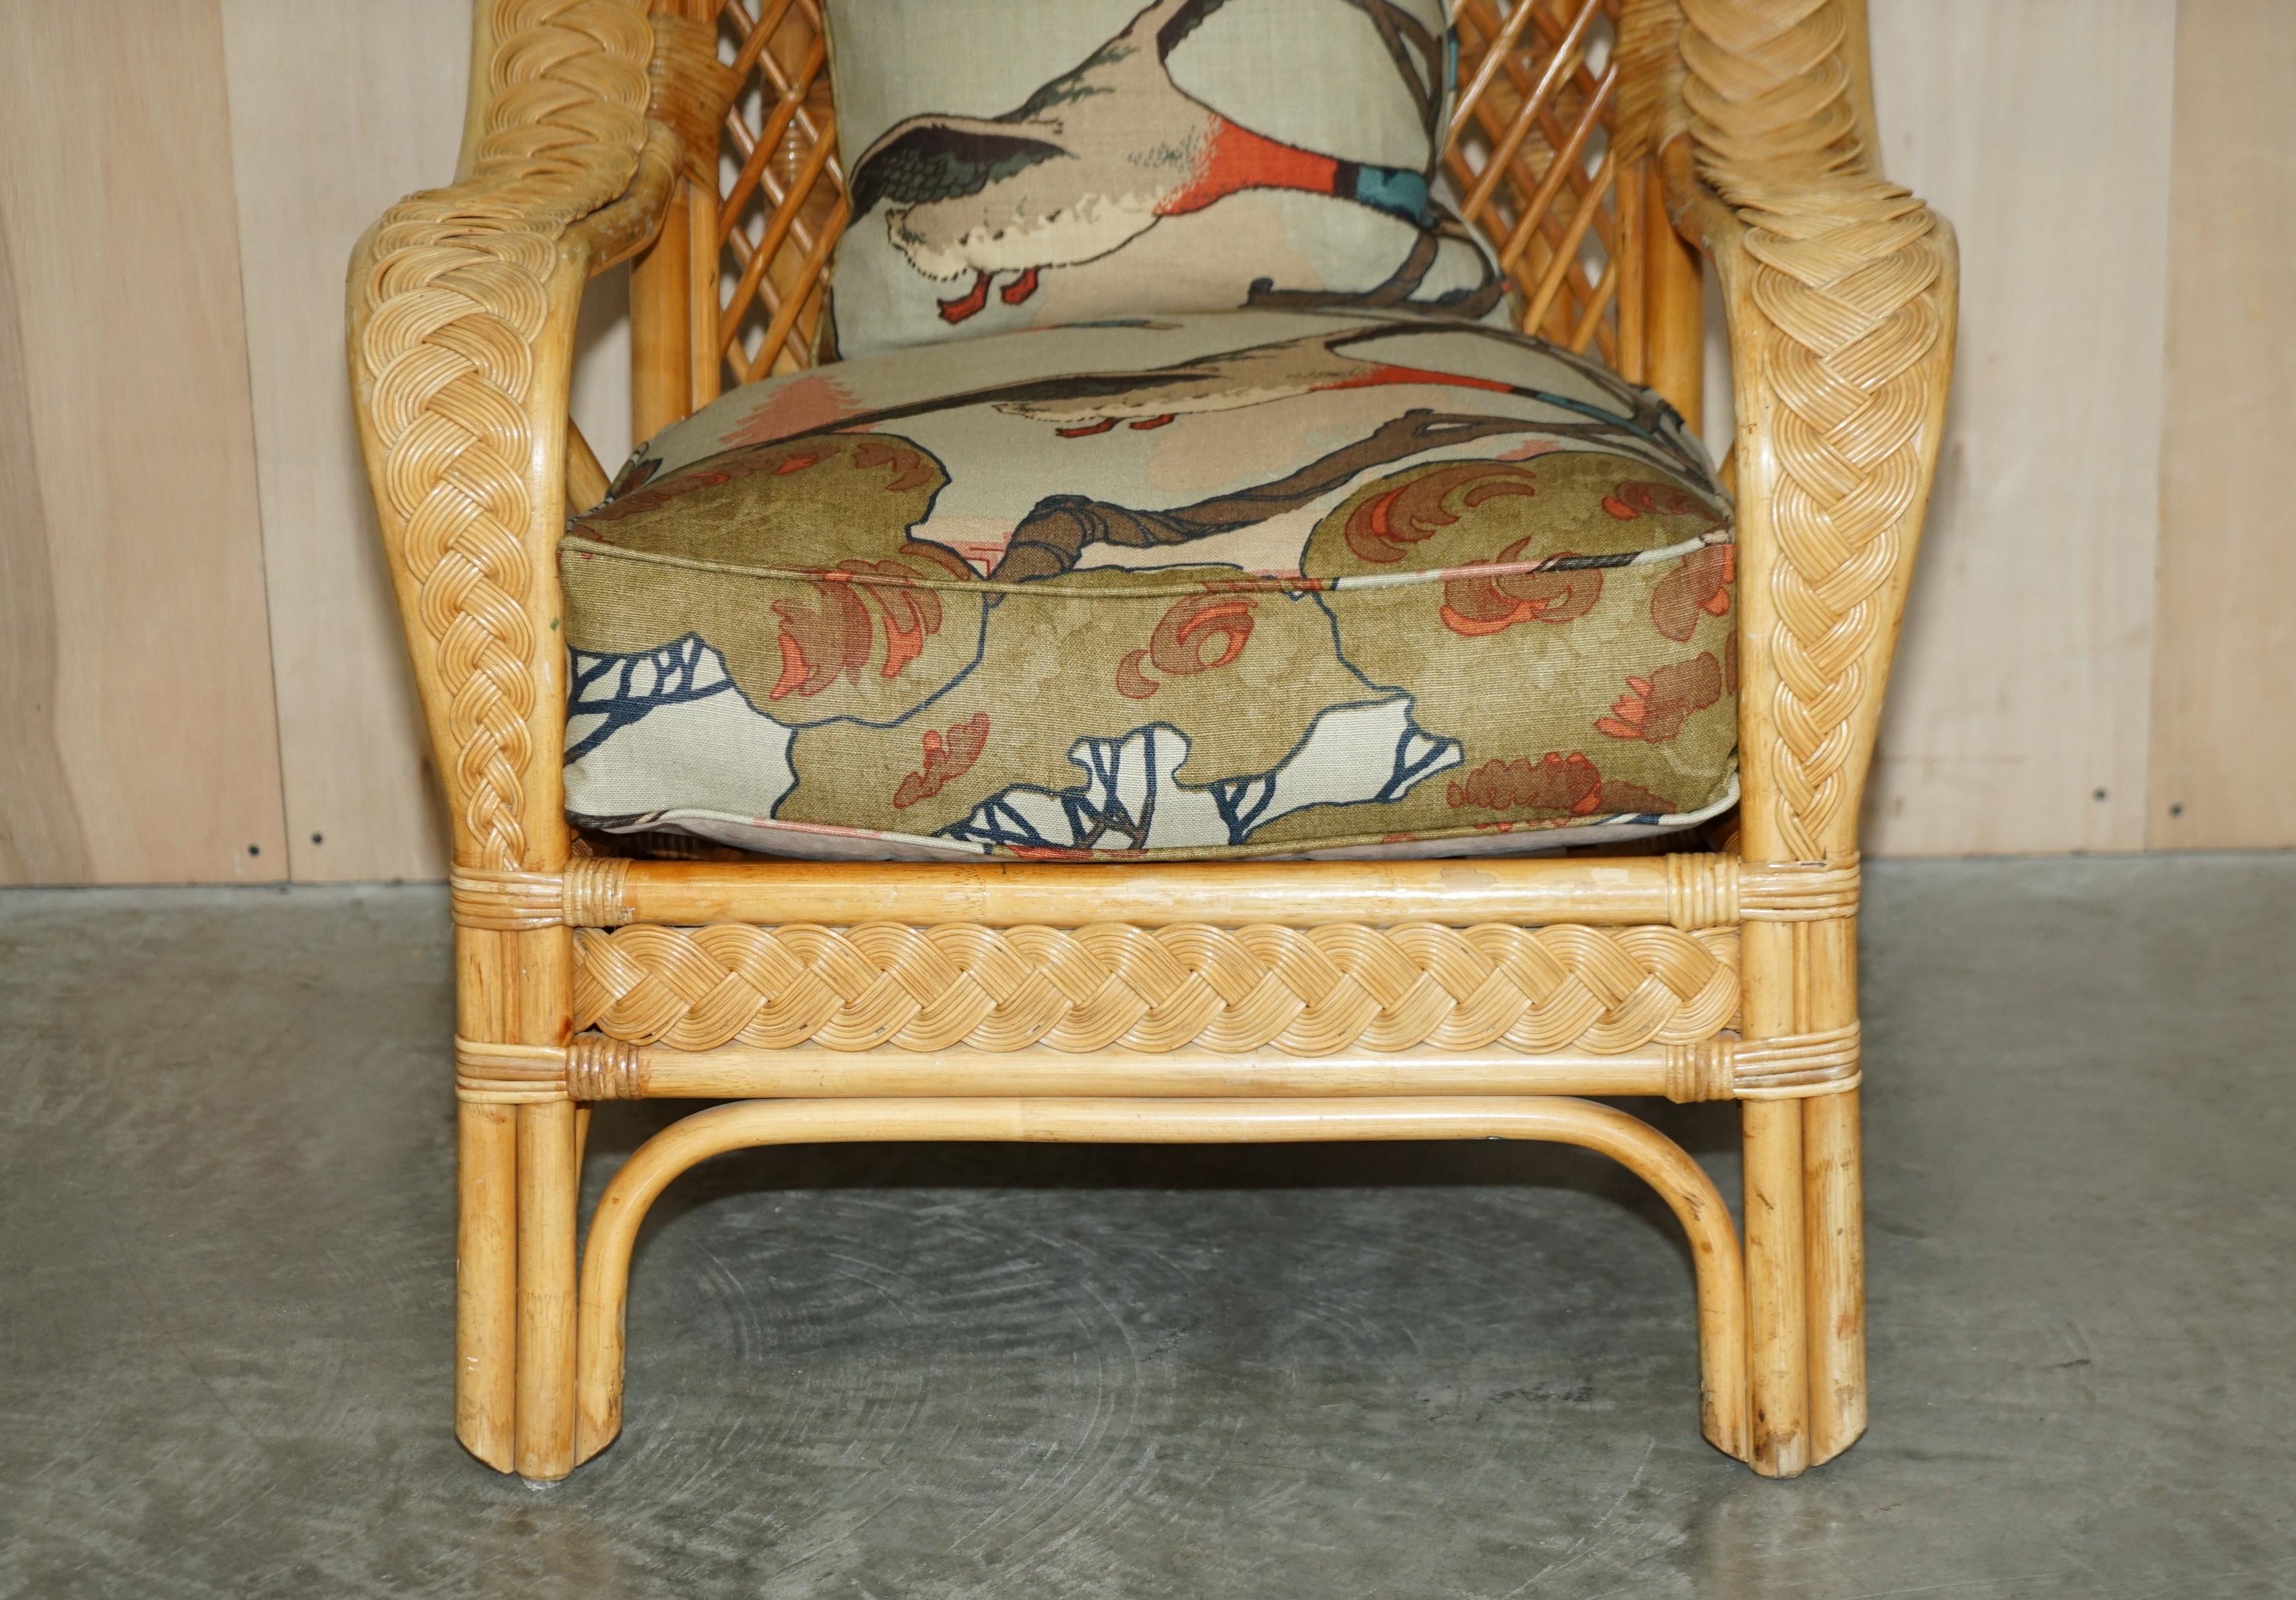 Hand-Crafted WICKER ARMCHAIRS STOOL TABLE SUITE UPHOLSTERED WiTH MULBERRY FLYING DUCKS FABRIC For Sale